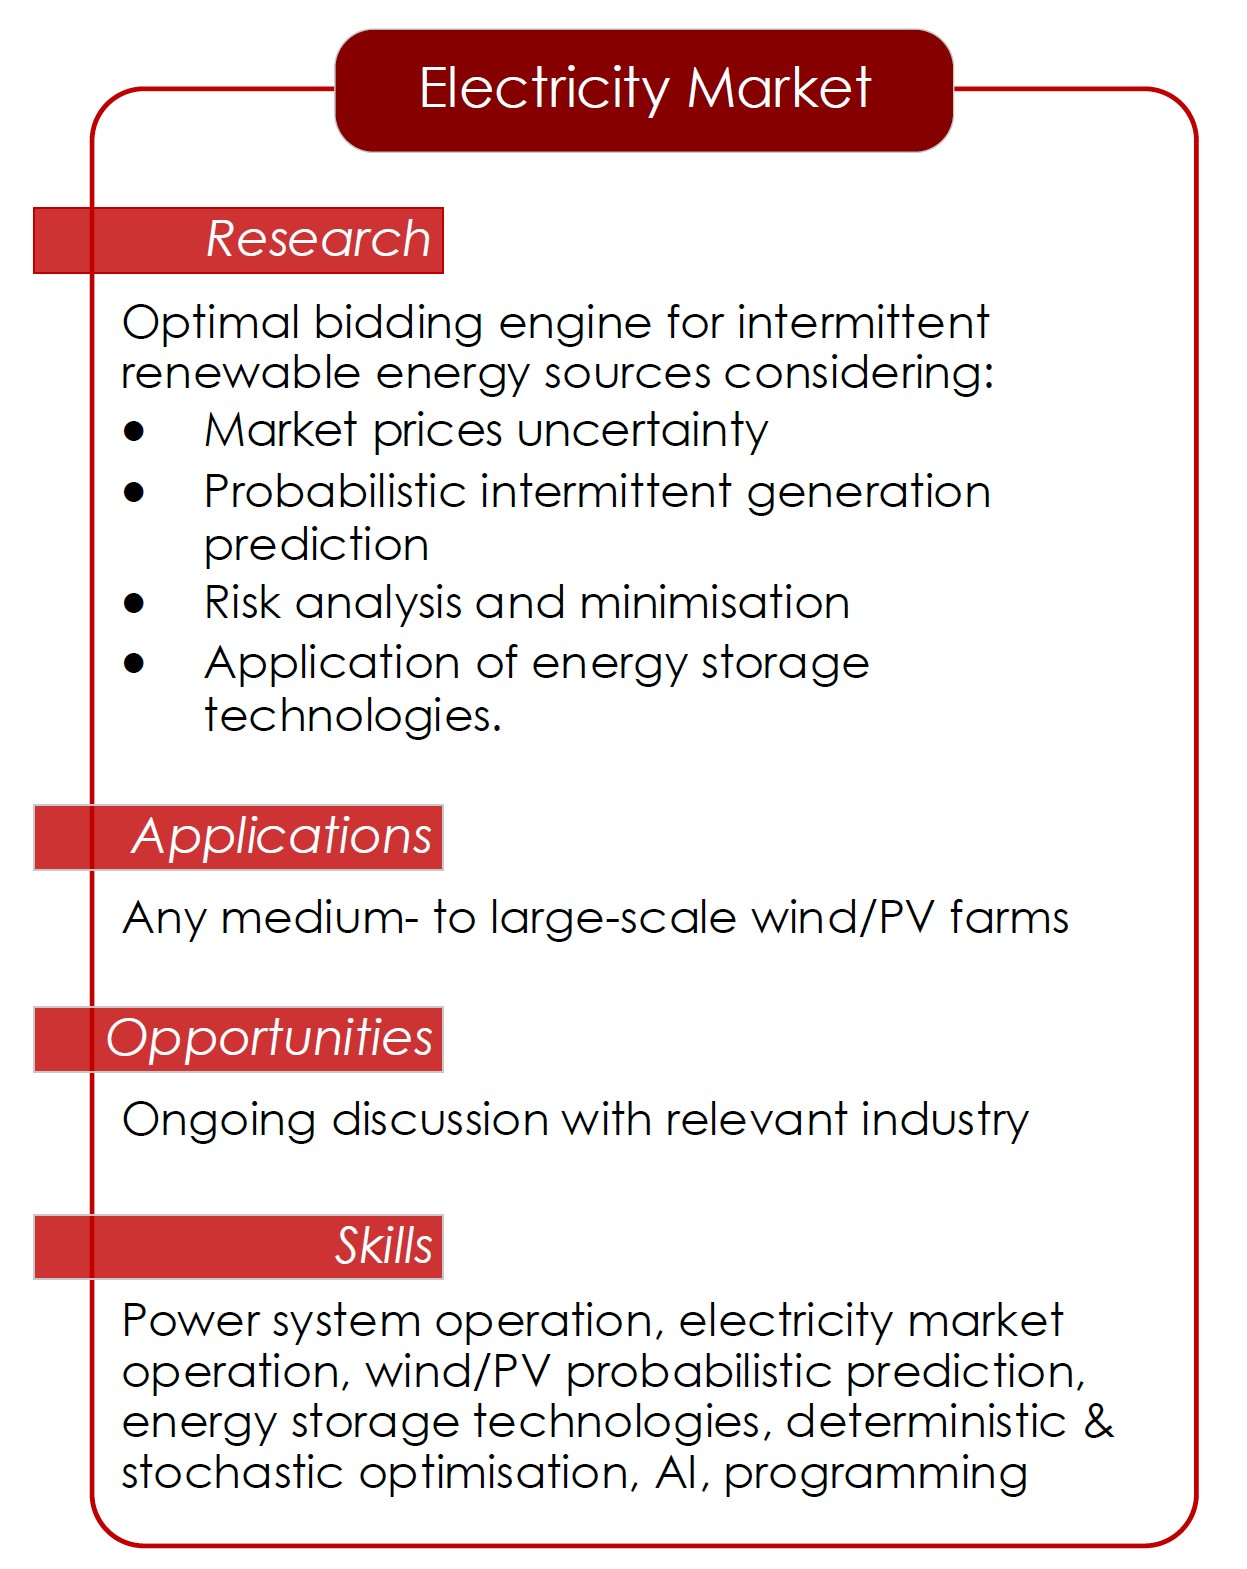 Research on Electricity Market